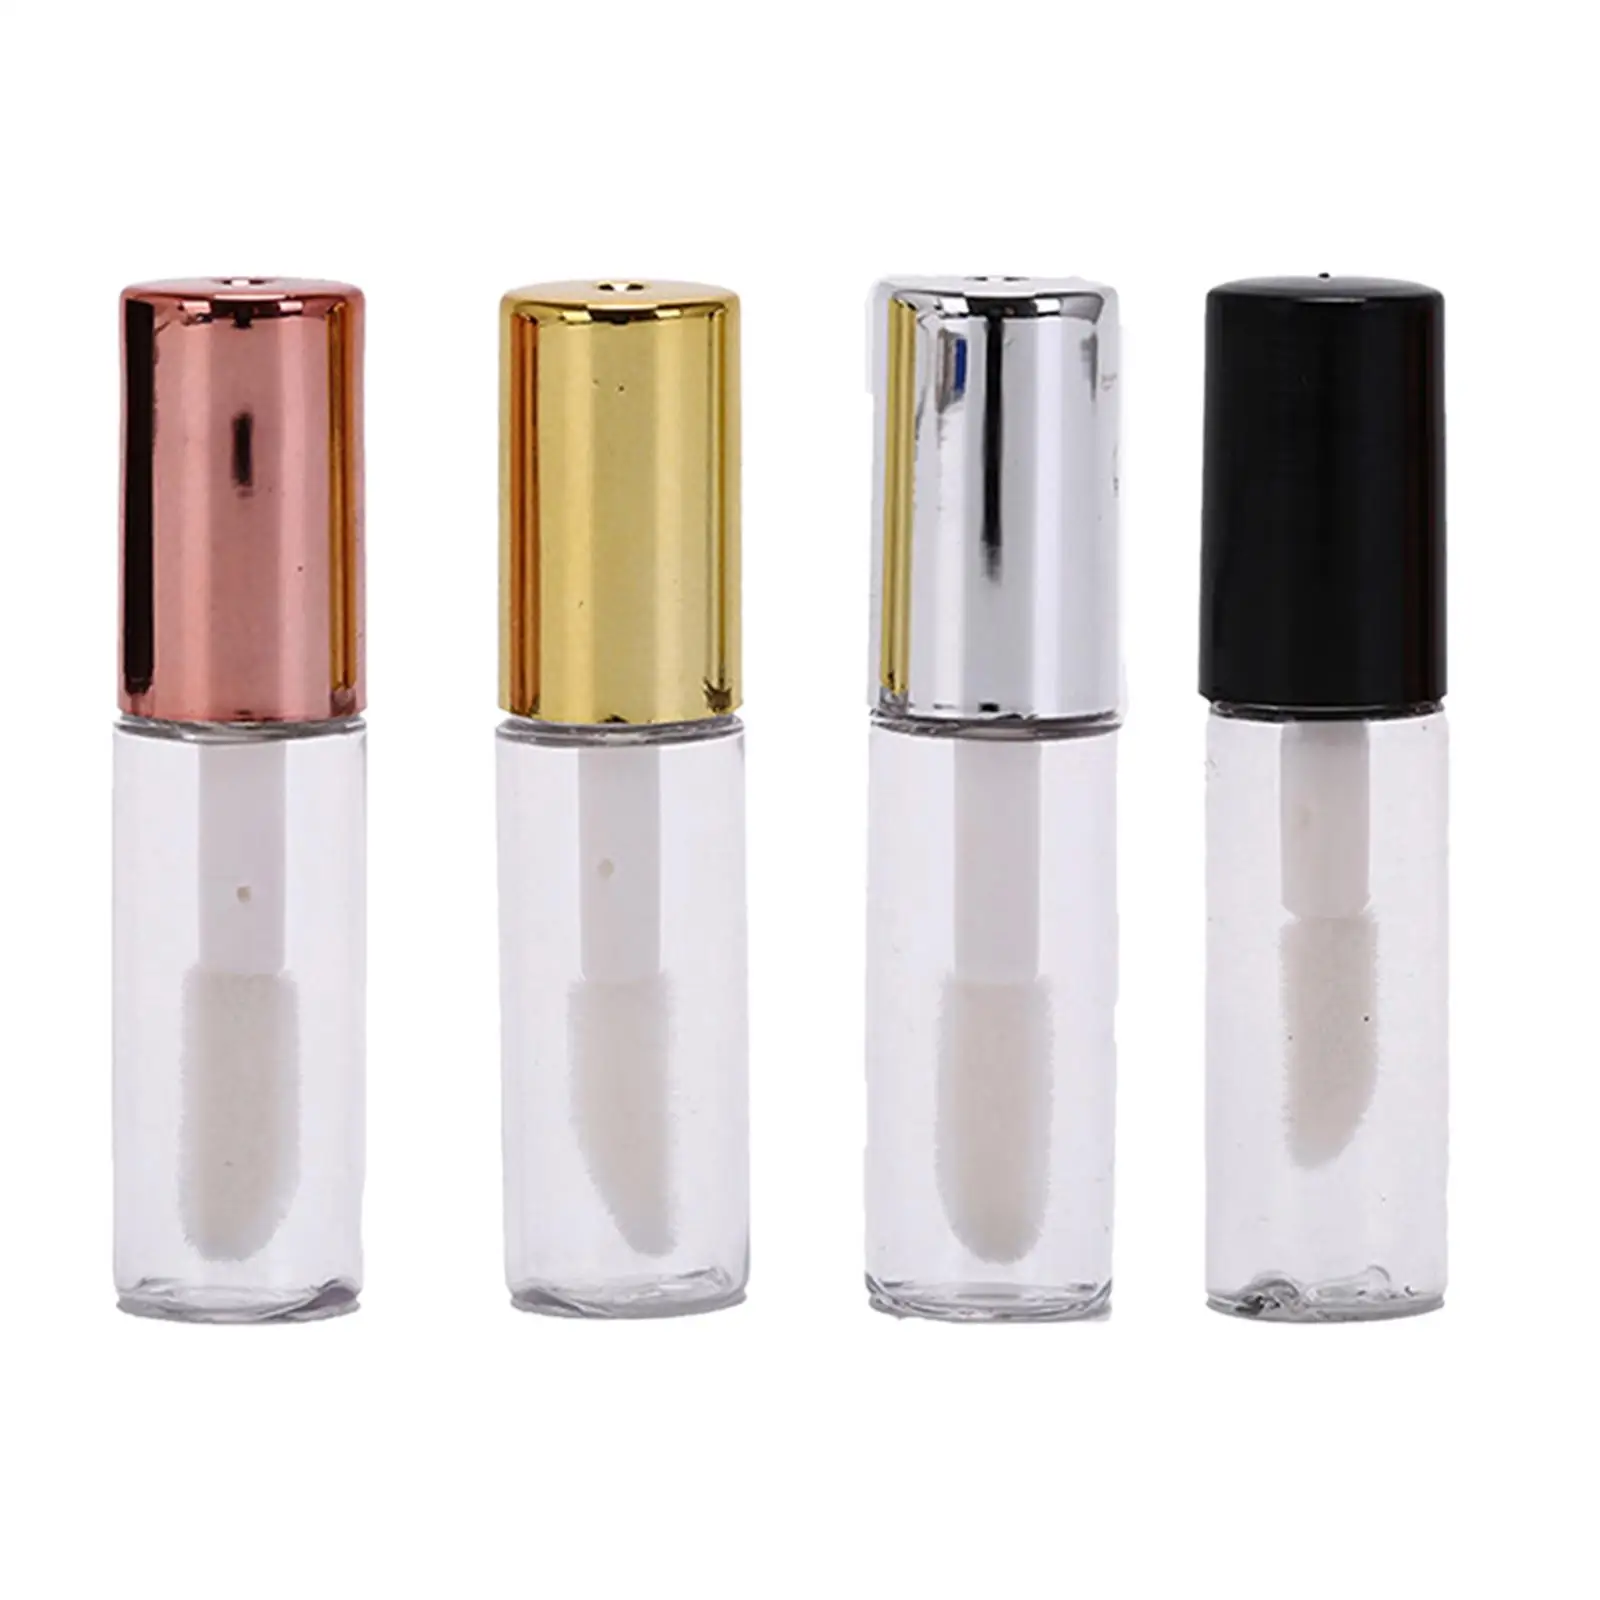 

10Pcs Lip Gloss Tubes Containers DIY Cosmetics Containers Cute Mini Lip Balm Containers Lip Gloss Containers for Women Girls DIY